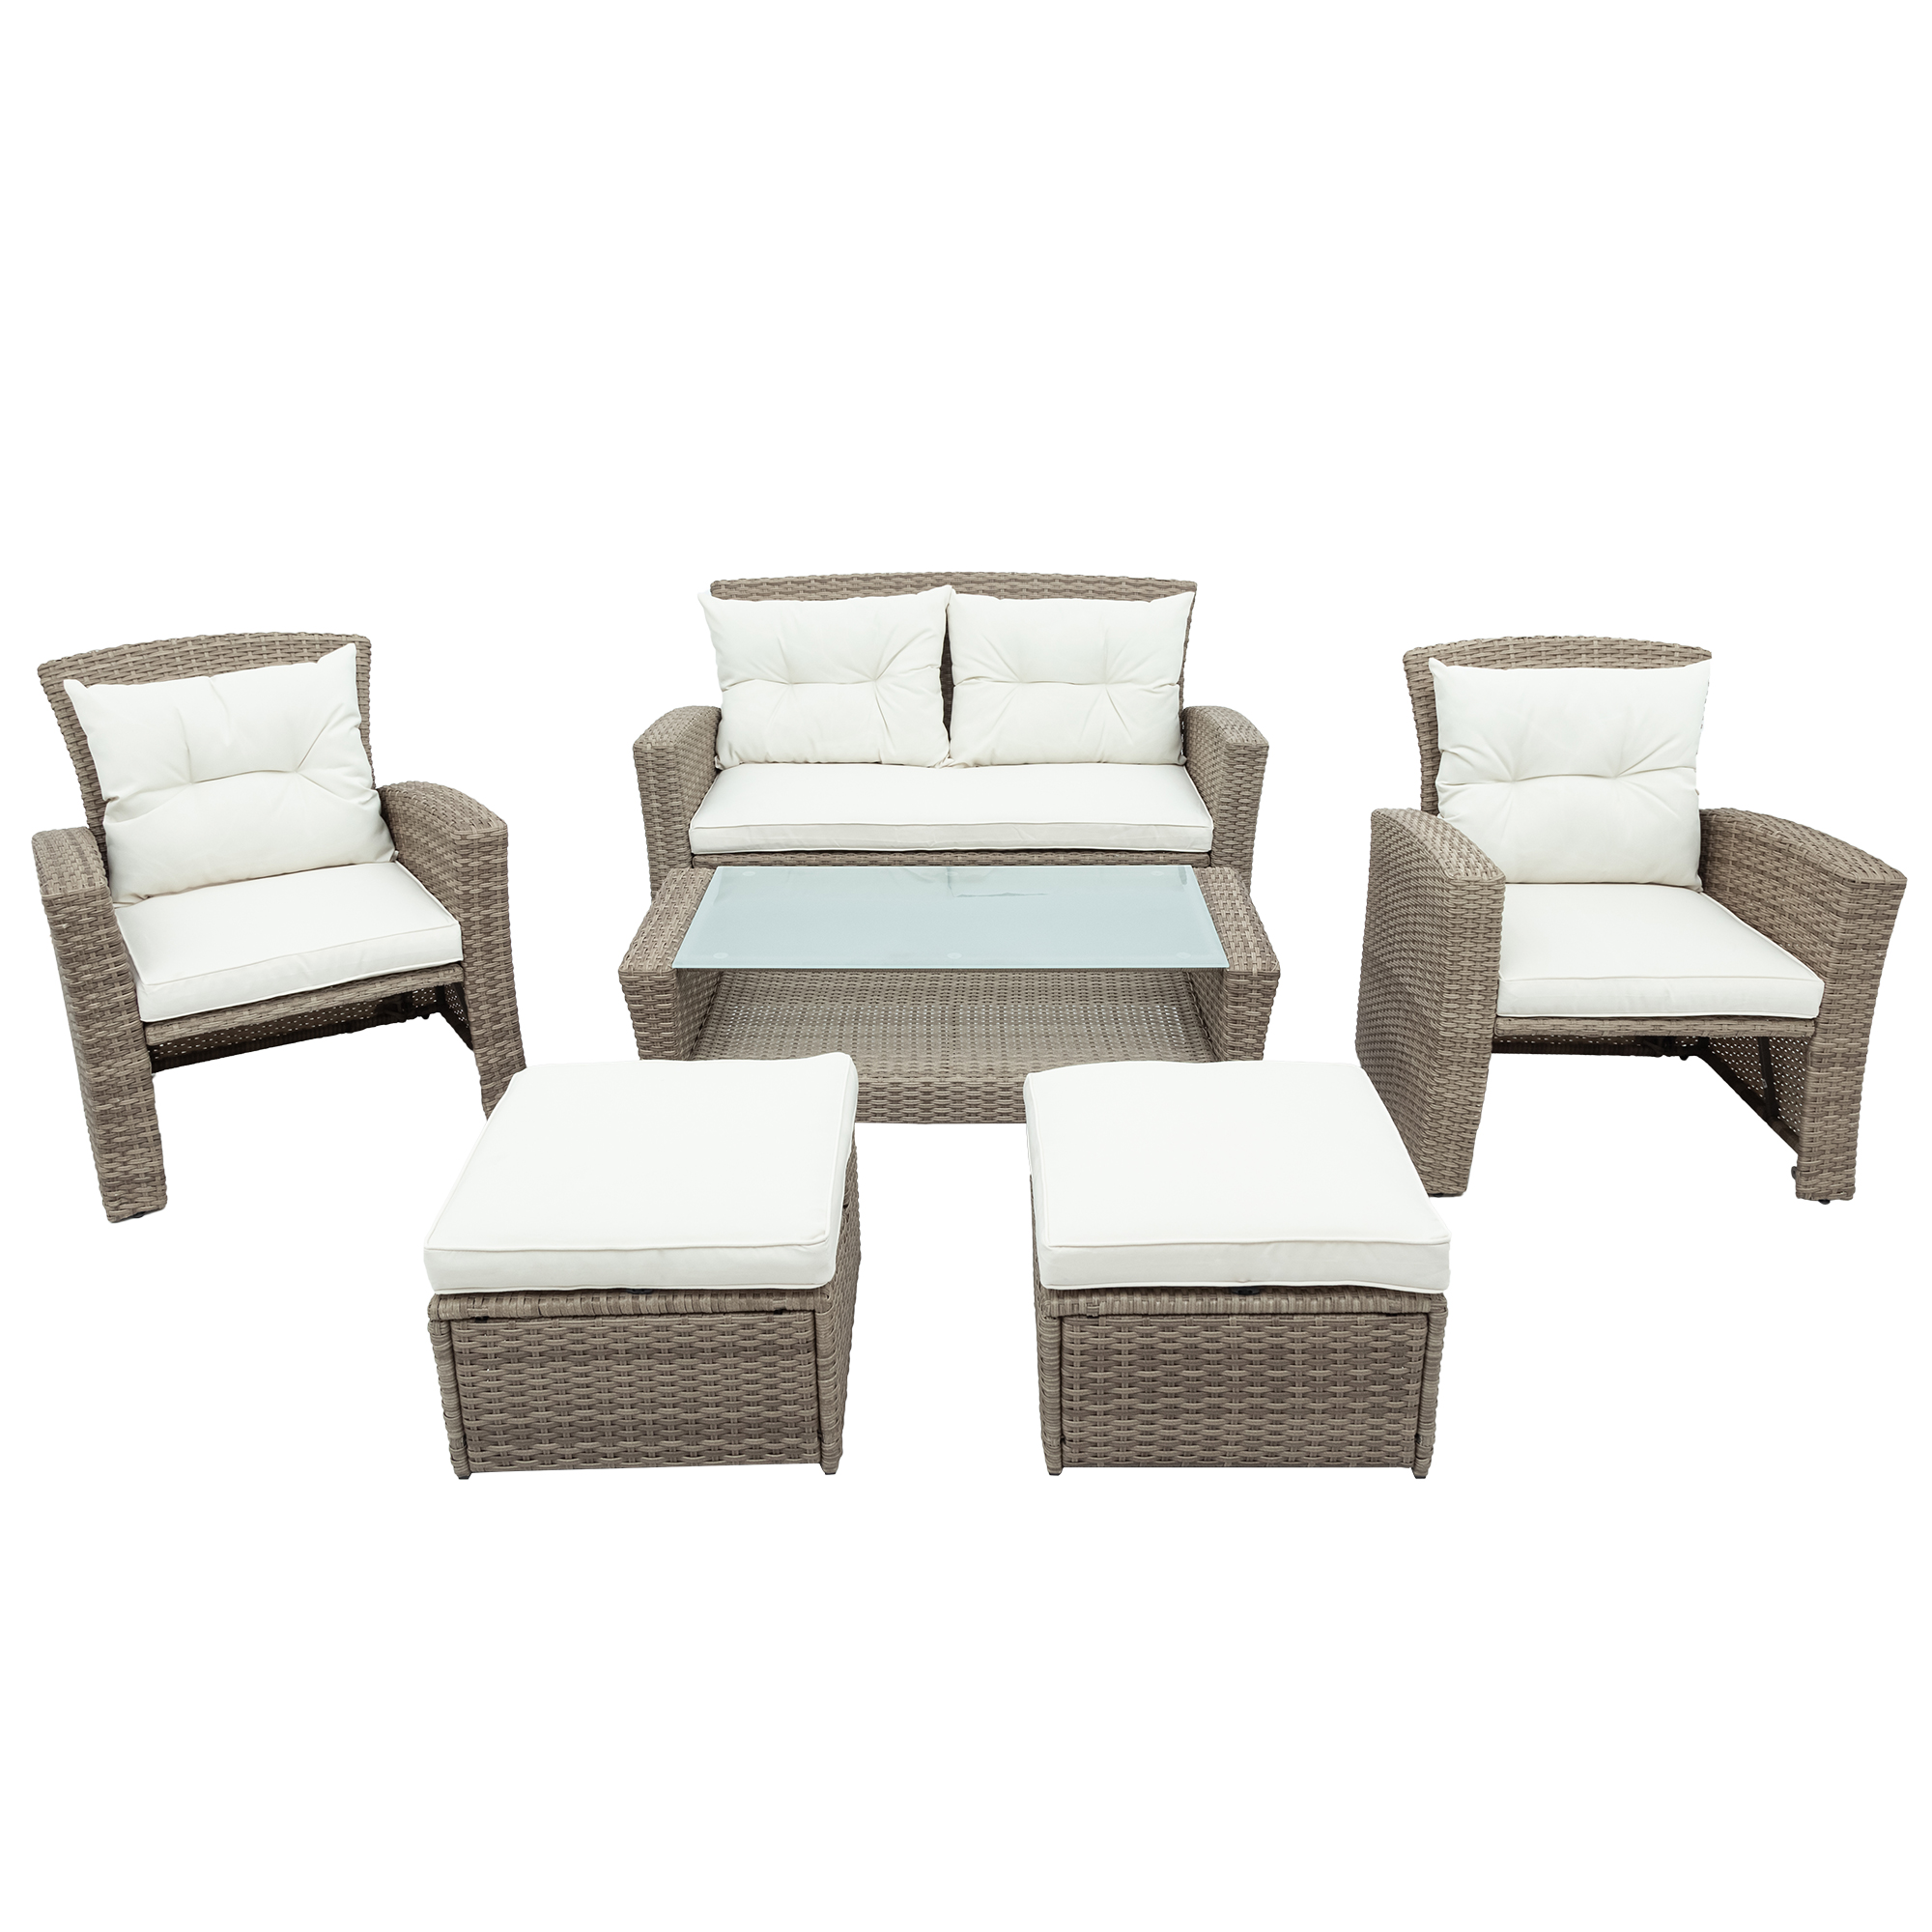 SESSLIFE 6 Piece Wicker Patio Furniture Set, Outdoor Sectional Sofa with Table, Ottoman and Washable Cushions, Patio Seating Sets for Lawn Porch Poolside - image 5 of 9